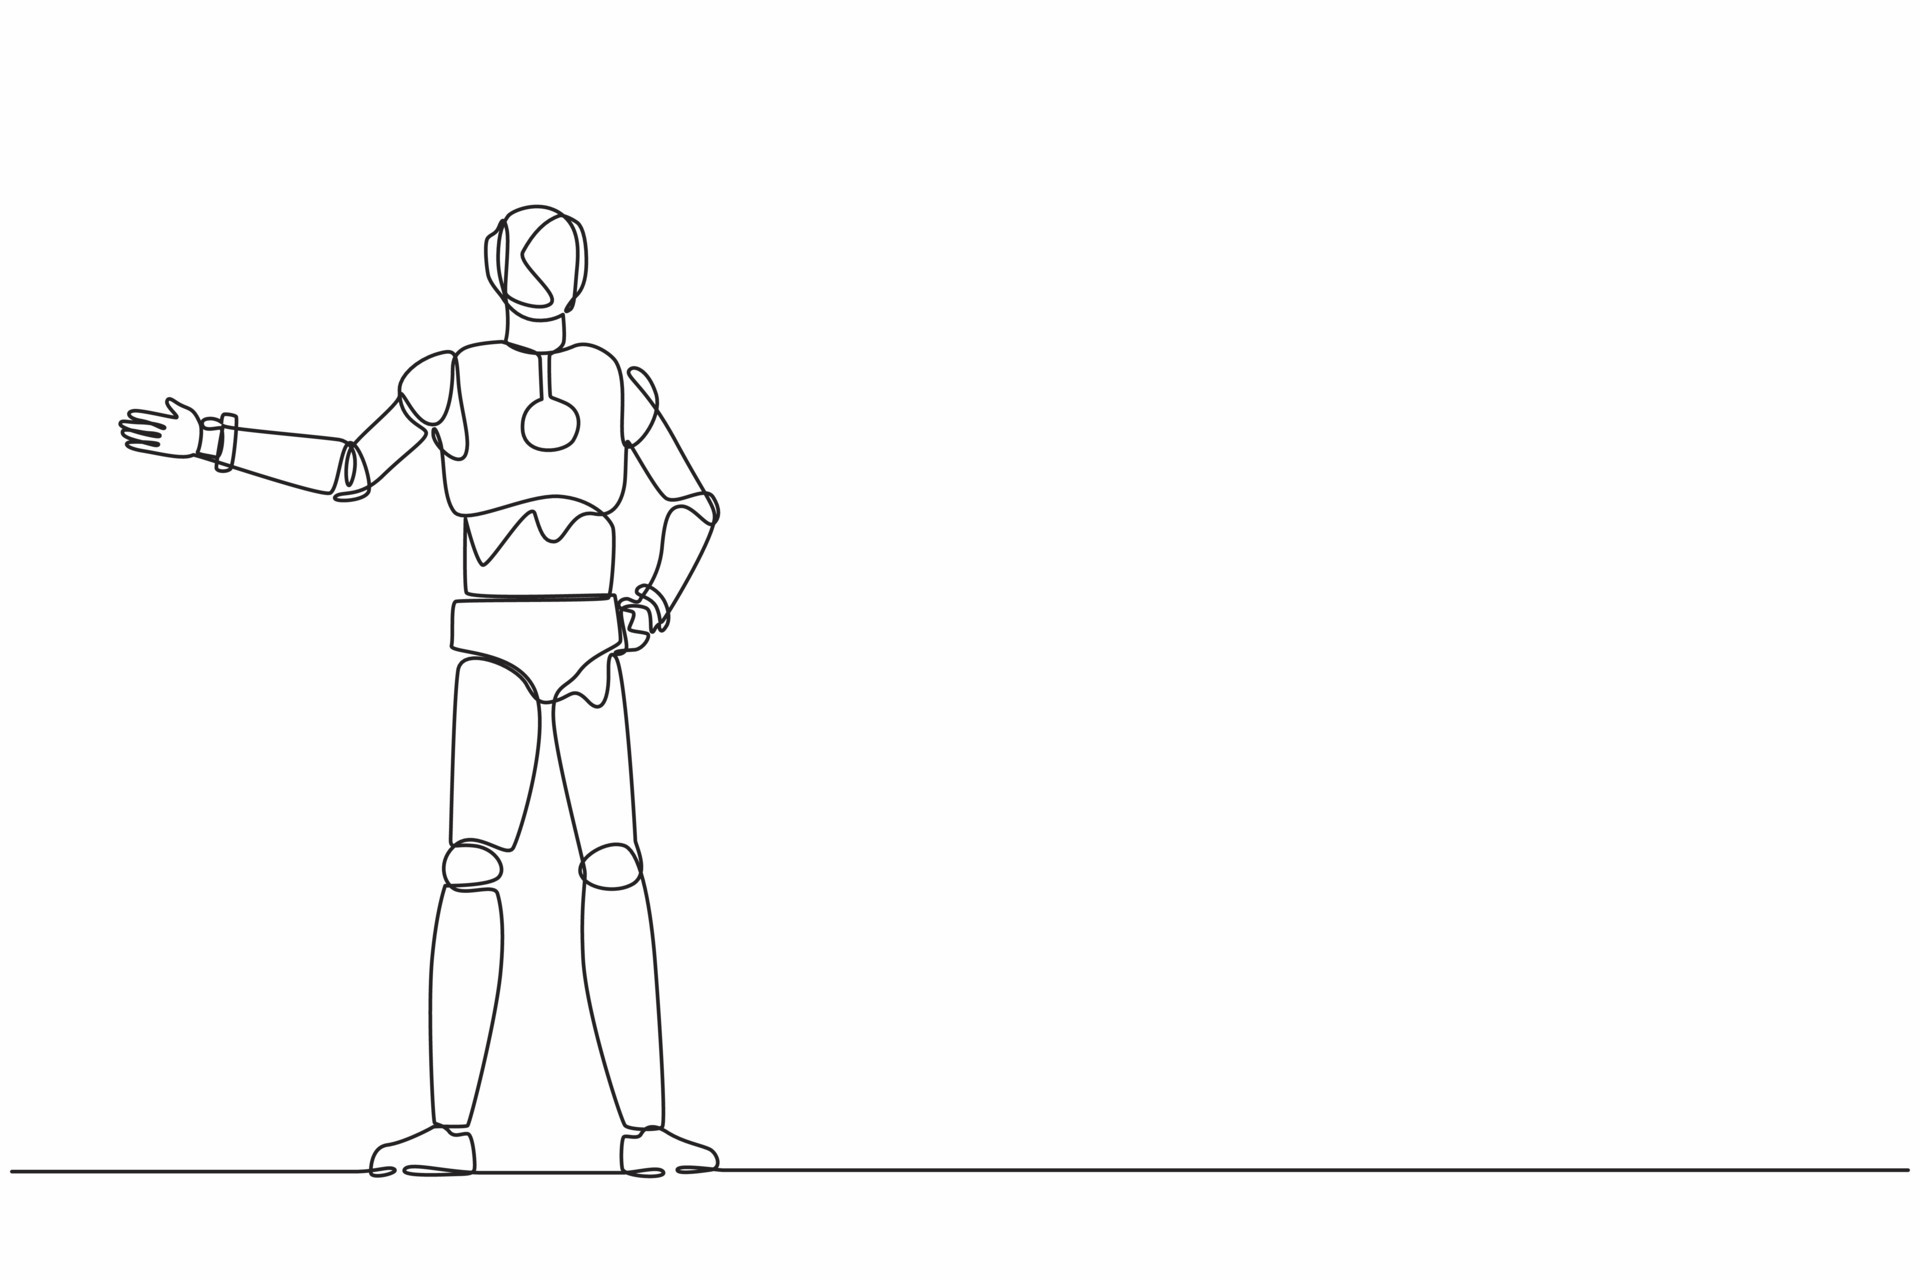 Human Robot Future Machine Technology Concept Hand Drawn Robot And  Human Shaking Hands Concept Sketch Isolated Vector Illustration Royalty  Free SVG Cliparts Vectors And Stock Illustration Image 124112979